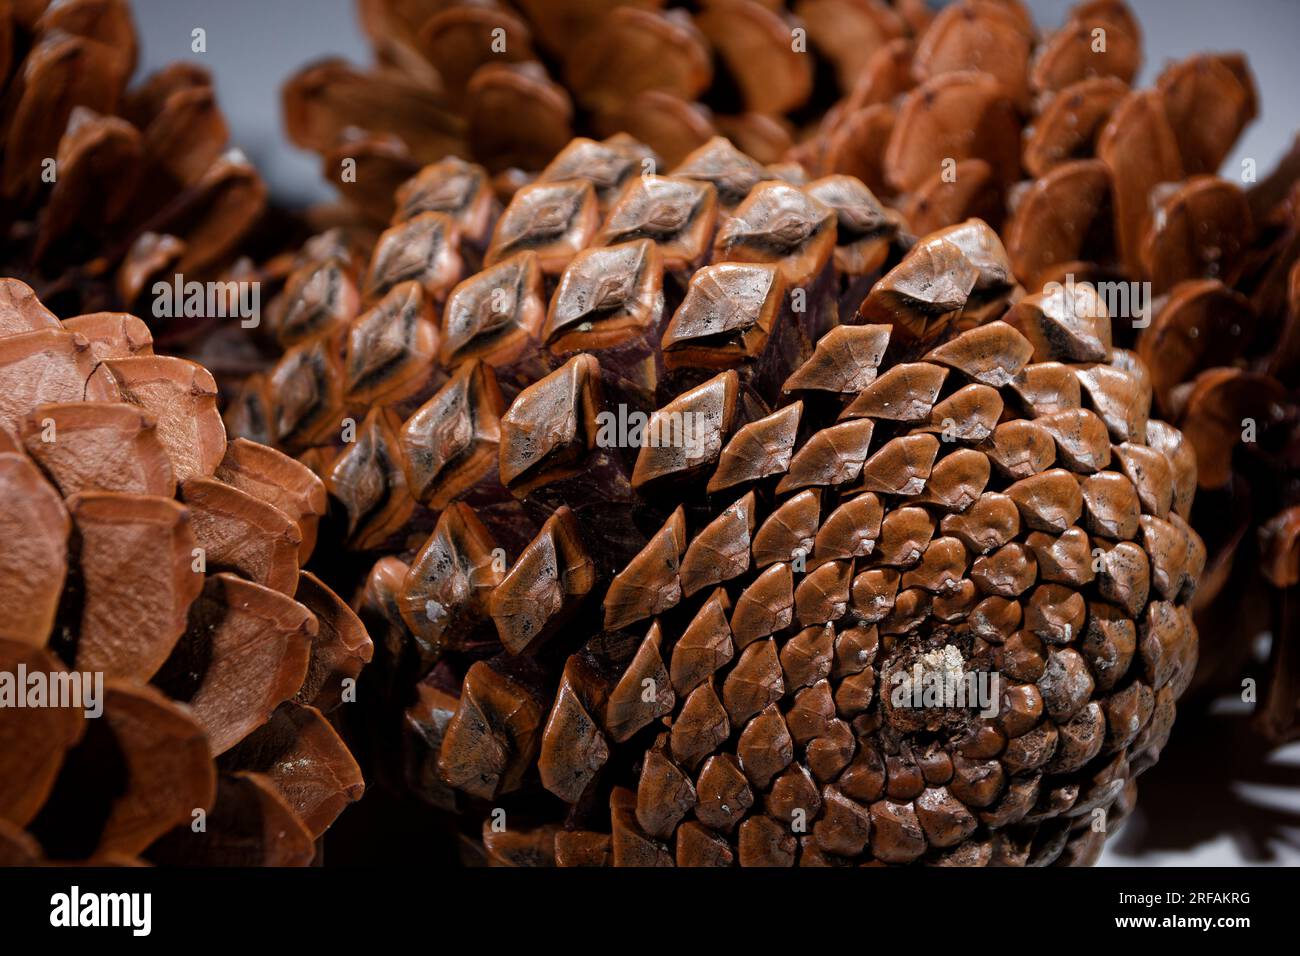 biological example of fibonacci spirals seen at a pine cone with opened leafs Stock Photo